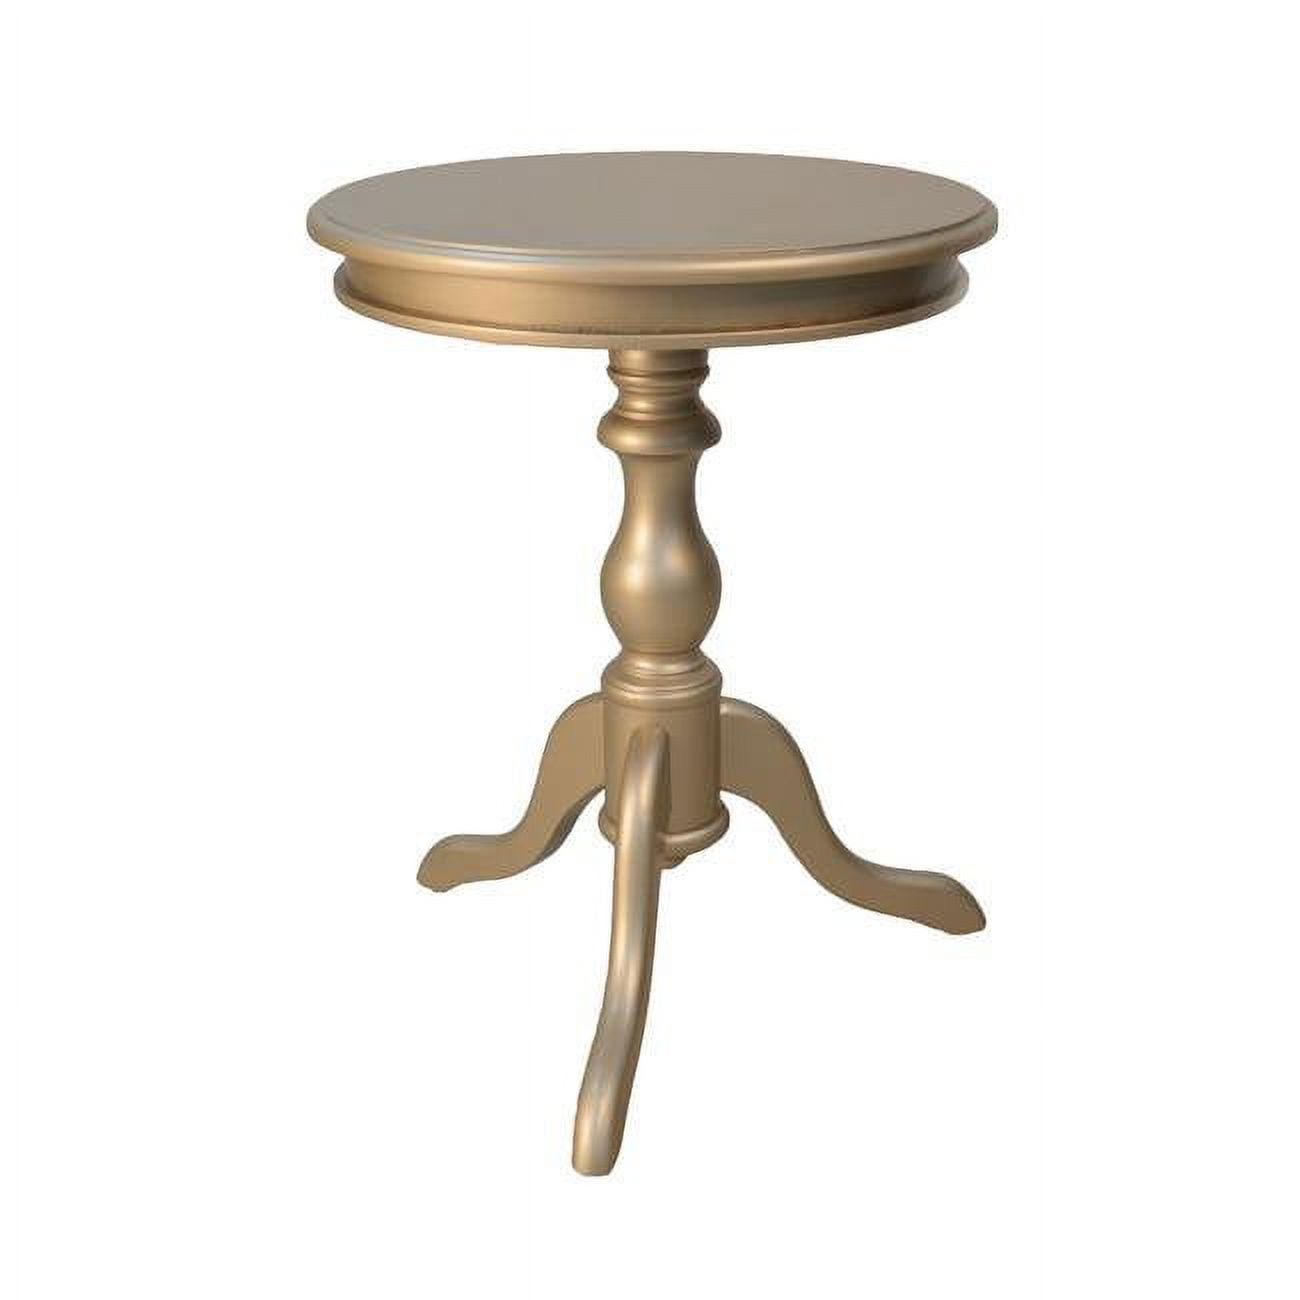 1925-cpg Gilda Side Table - Champagne - 25.25 X 19.5 X 19.5 In.